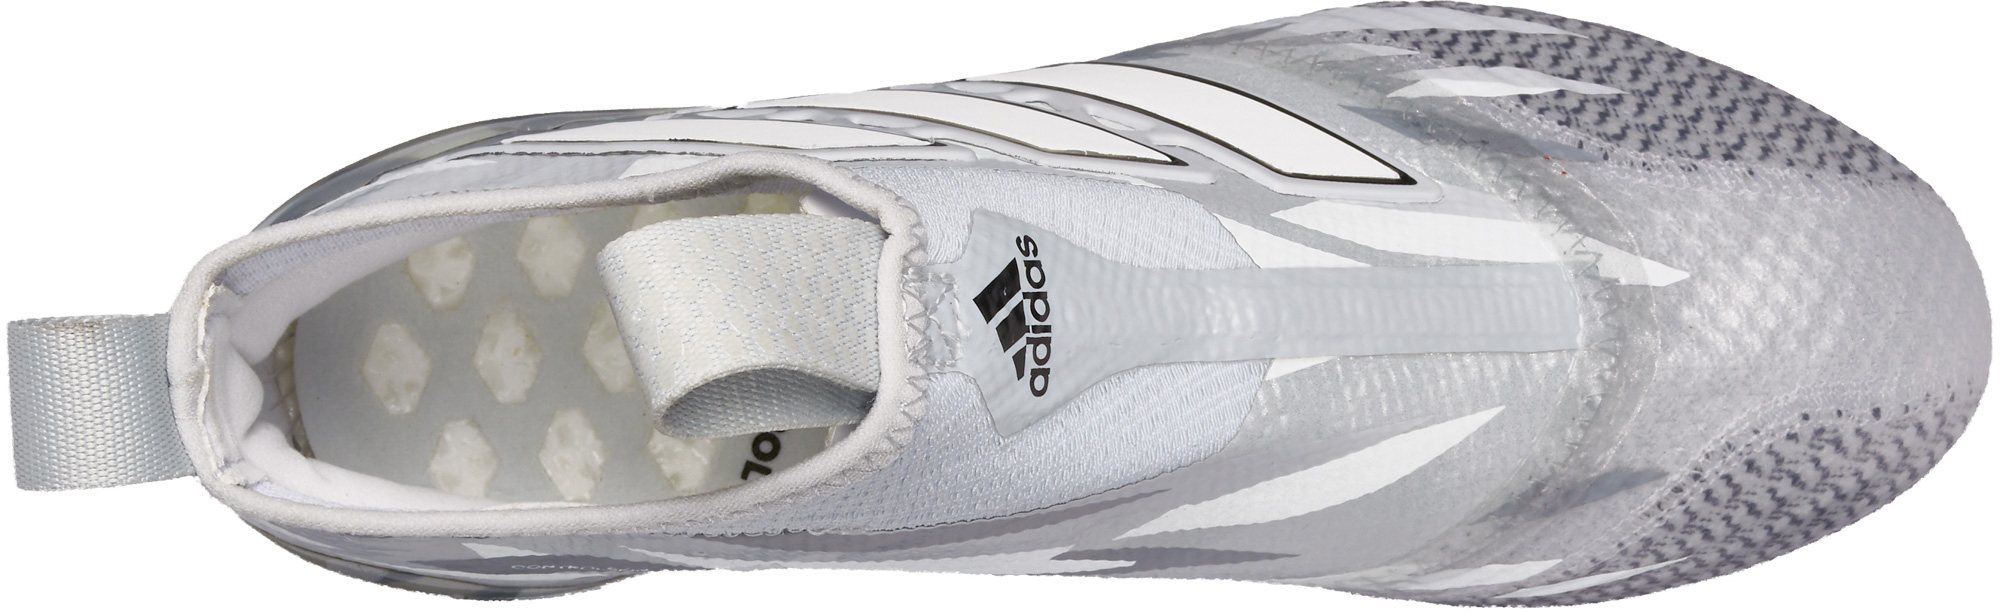 adidas ACE 17+ Purecontrol FG Soccer Cleats - Clear Grey & White - Soccer  Master